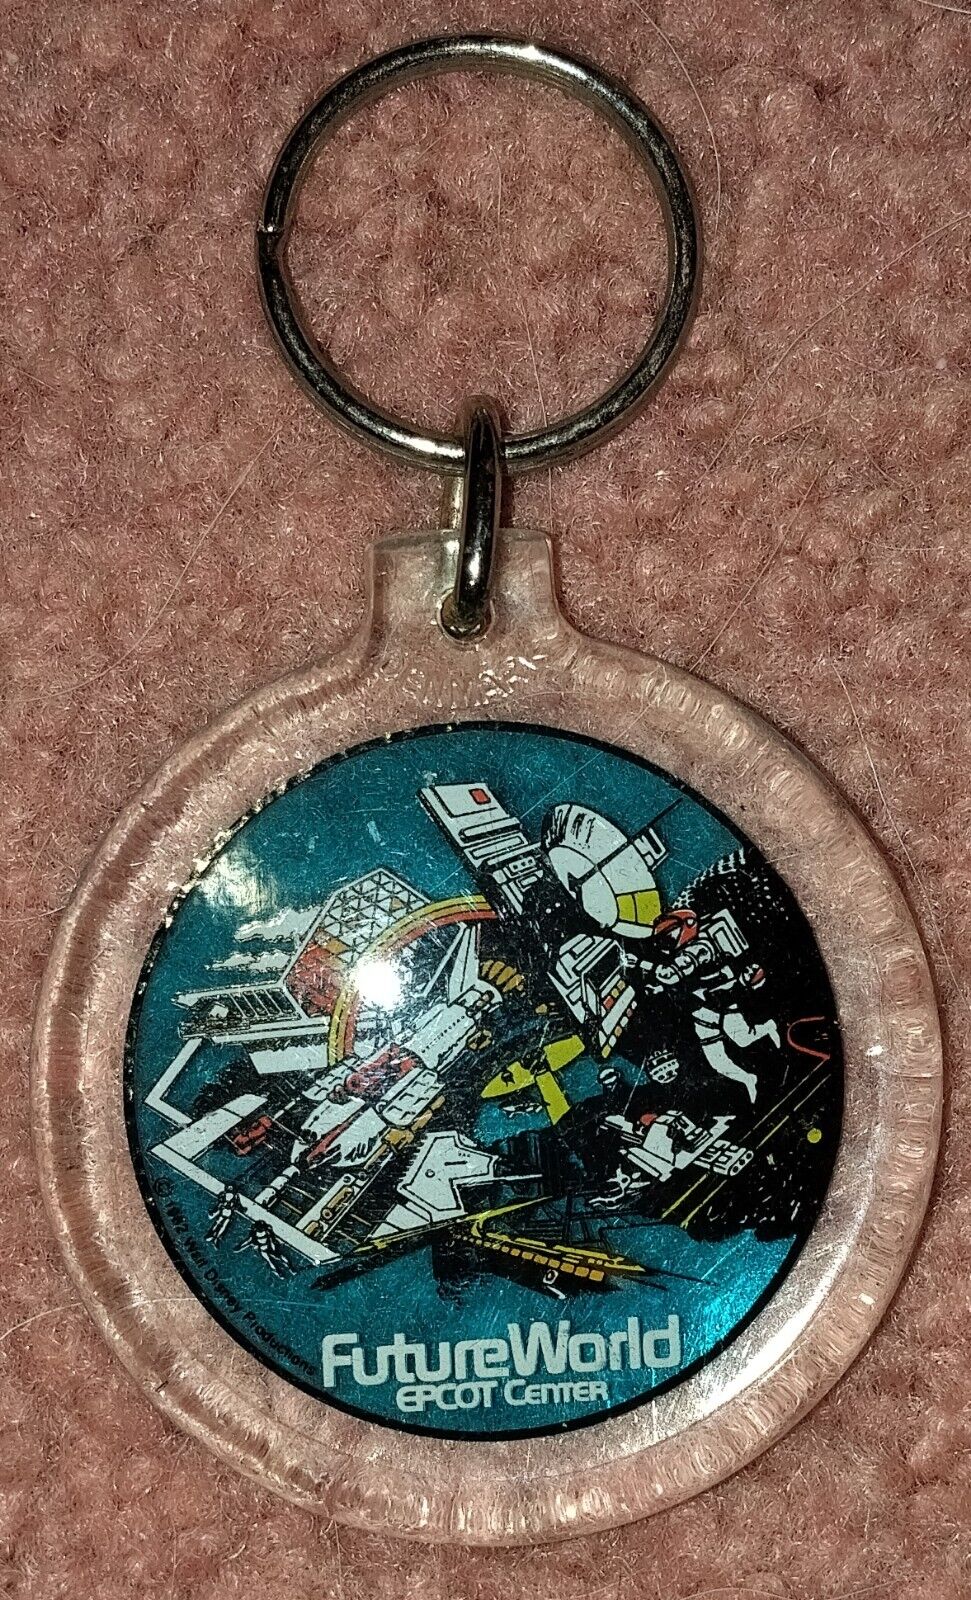 Vintage Future World Epcot Center Keychain Acrylic Bright Colors